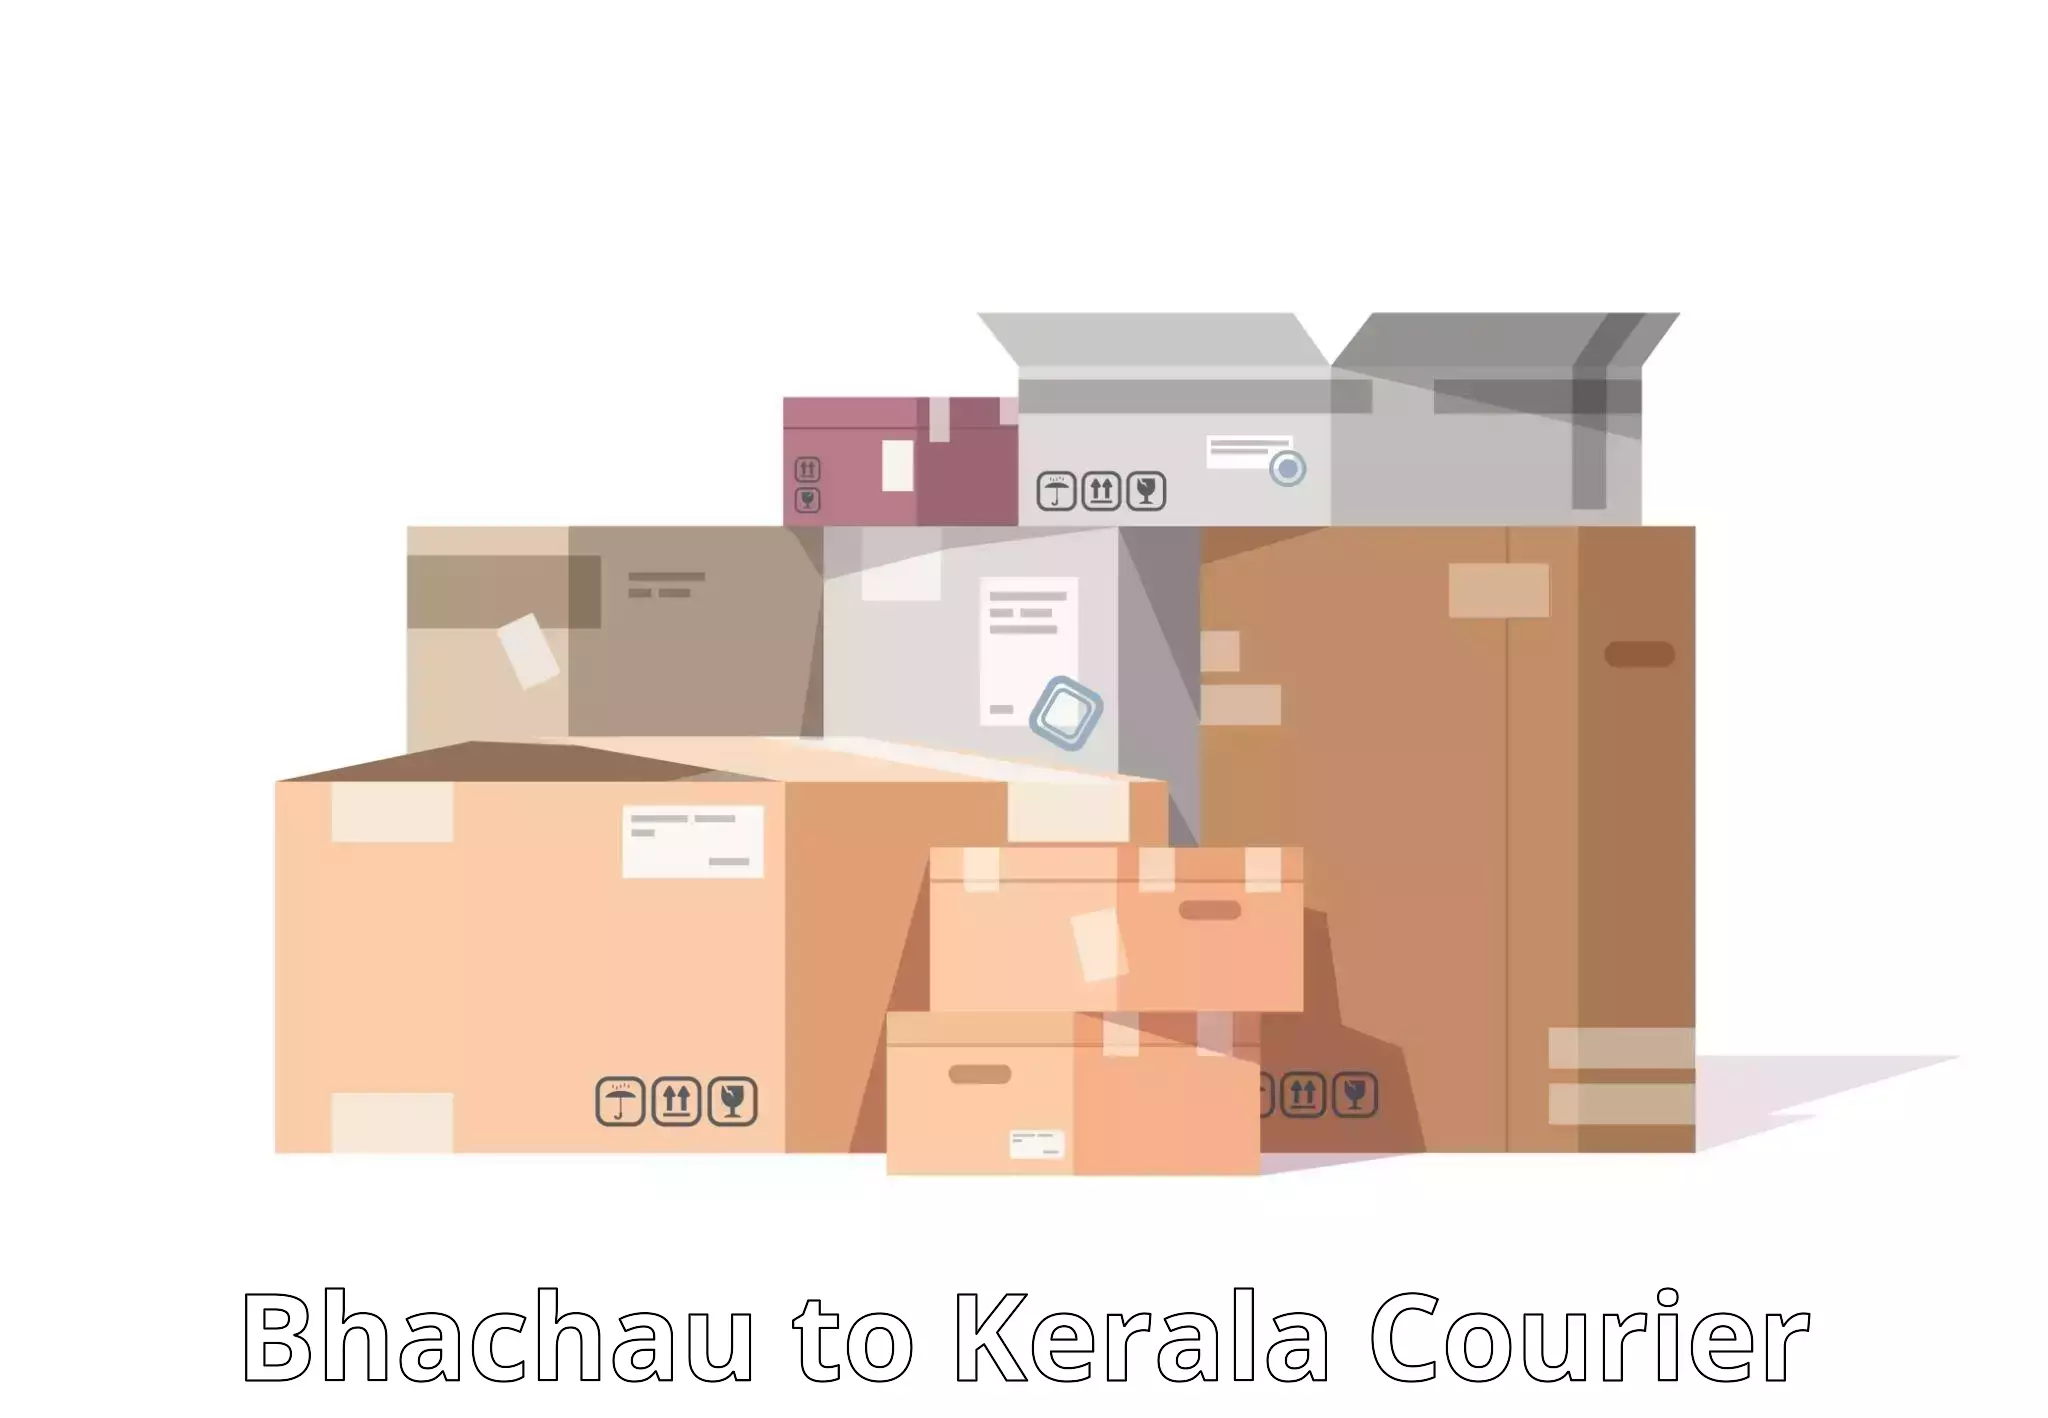 Express package services Bhachau to Kochi